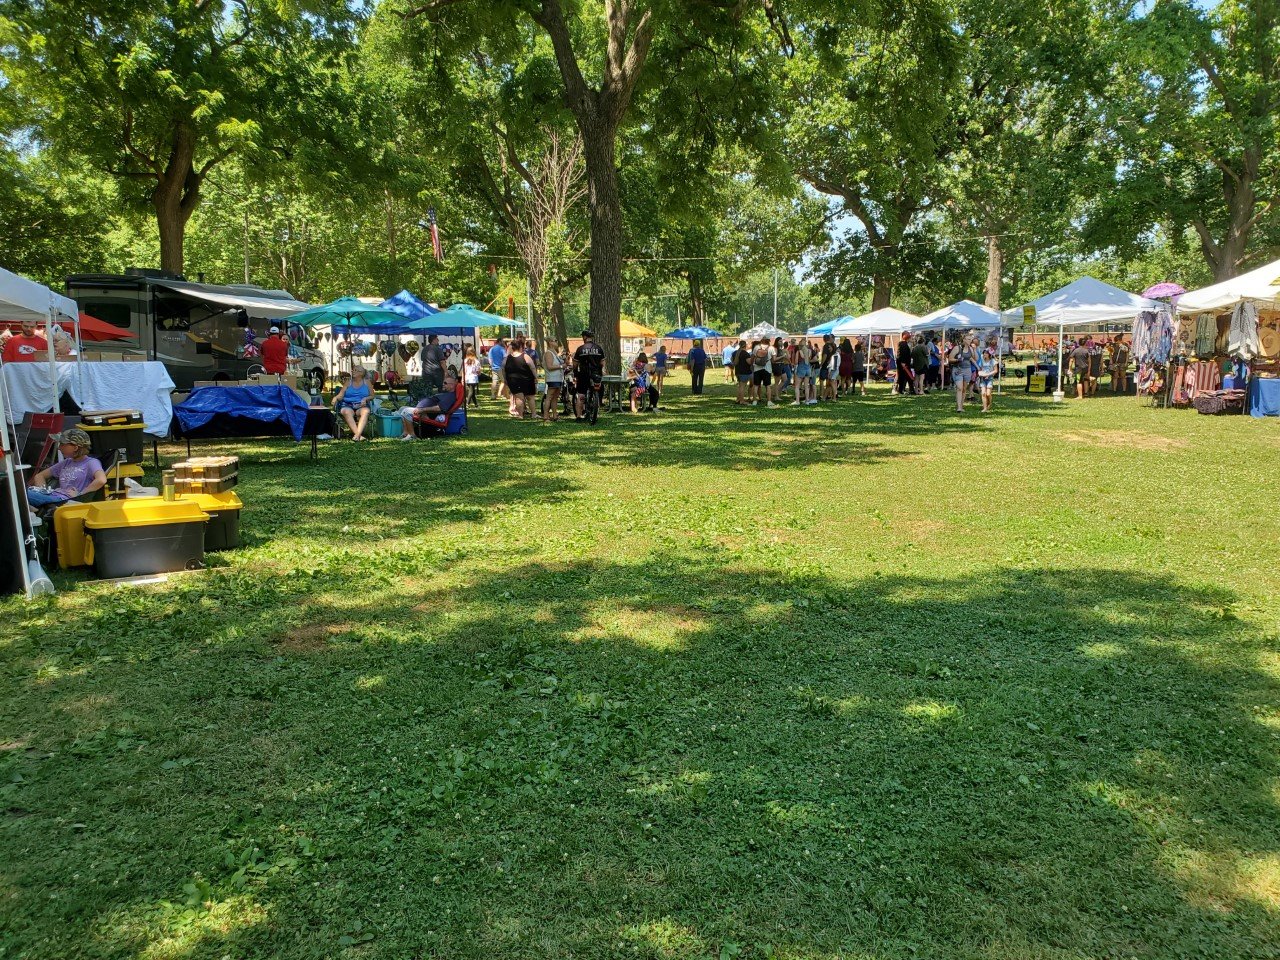 A wide variety of vendors had booths set up near Kiddieland in Lincoln Park on Monday as families celebrated the Fourth of July.